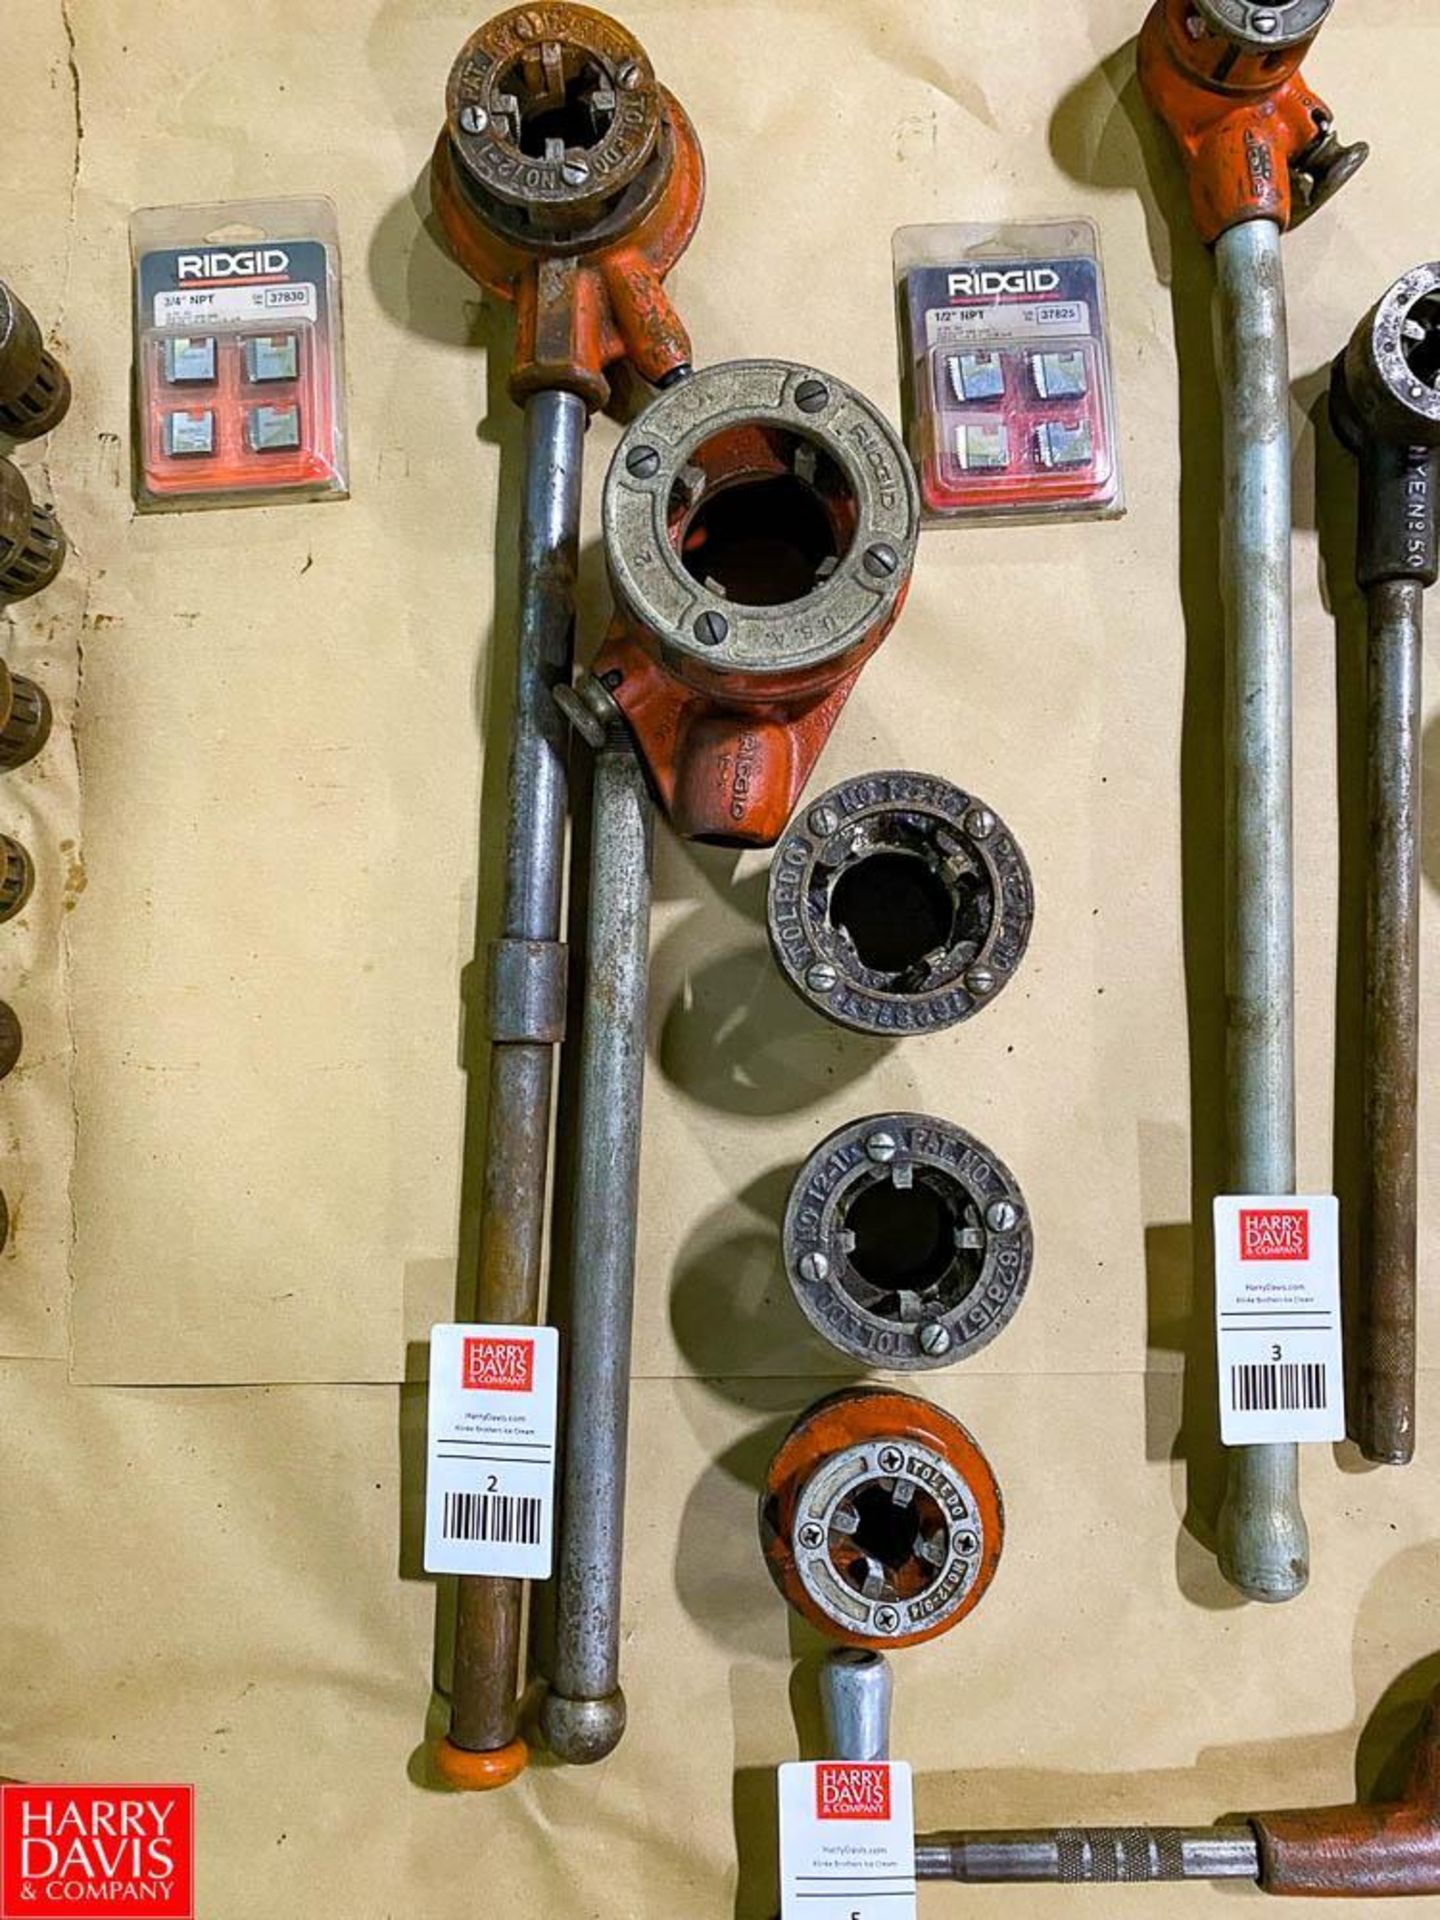 Ridgid (2) Pipe Threader with (3) No. 12 Various Size Dies (Ranging from 1'', 2'', 1/2'', 1/4'' and